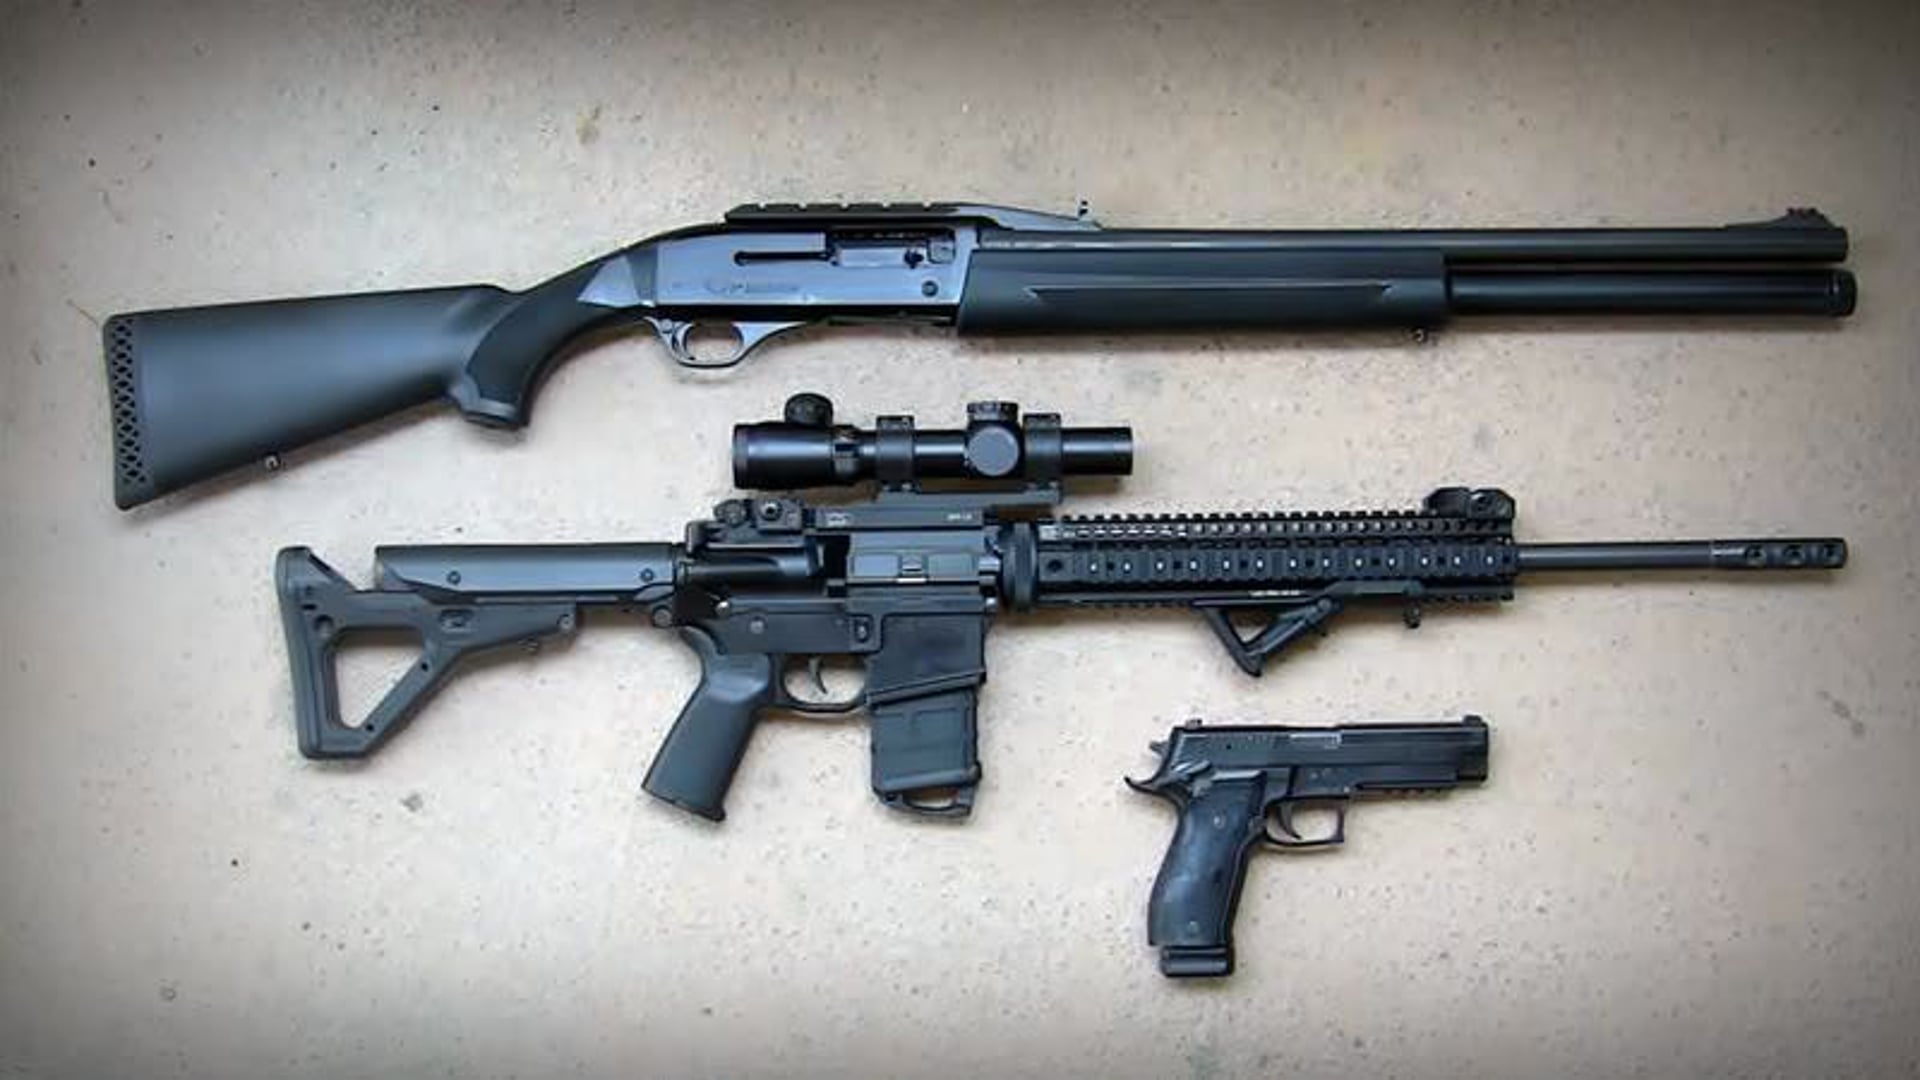 Firearm Options for Home Defense Part 1